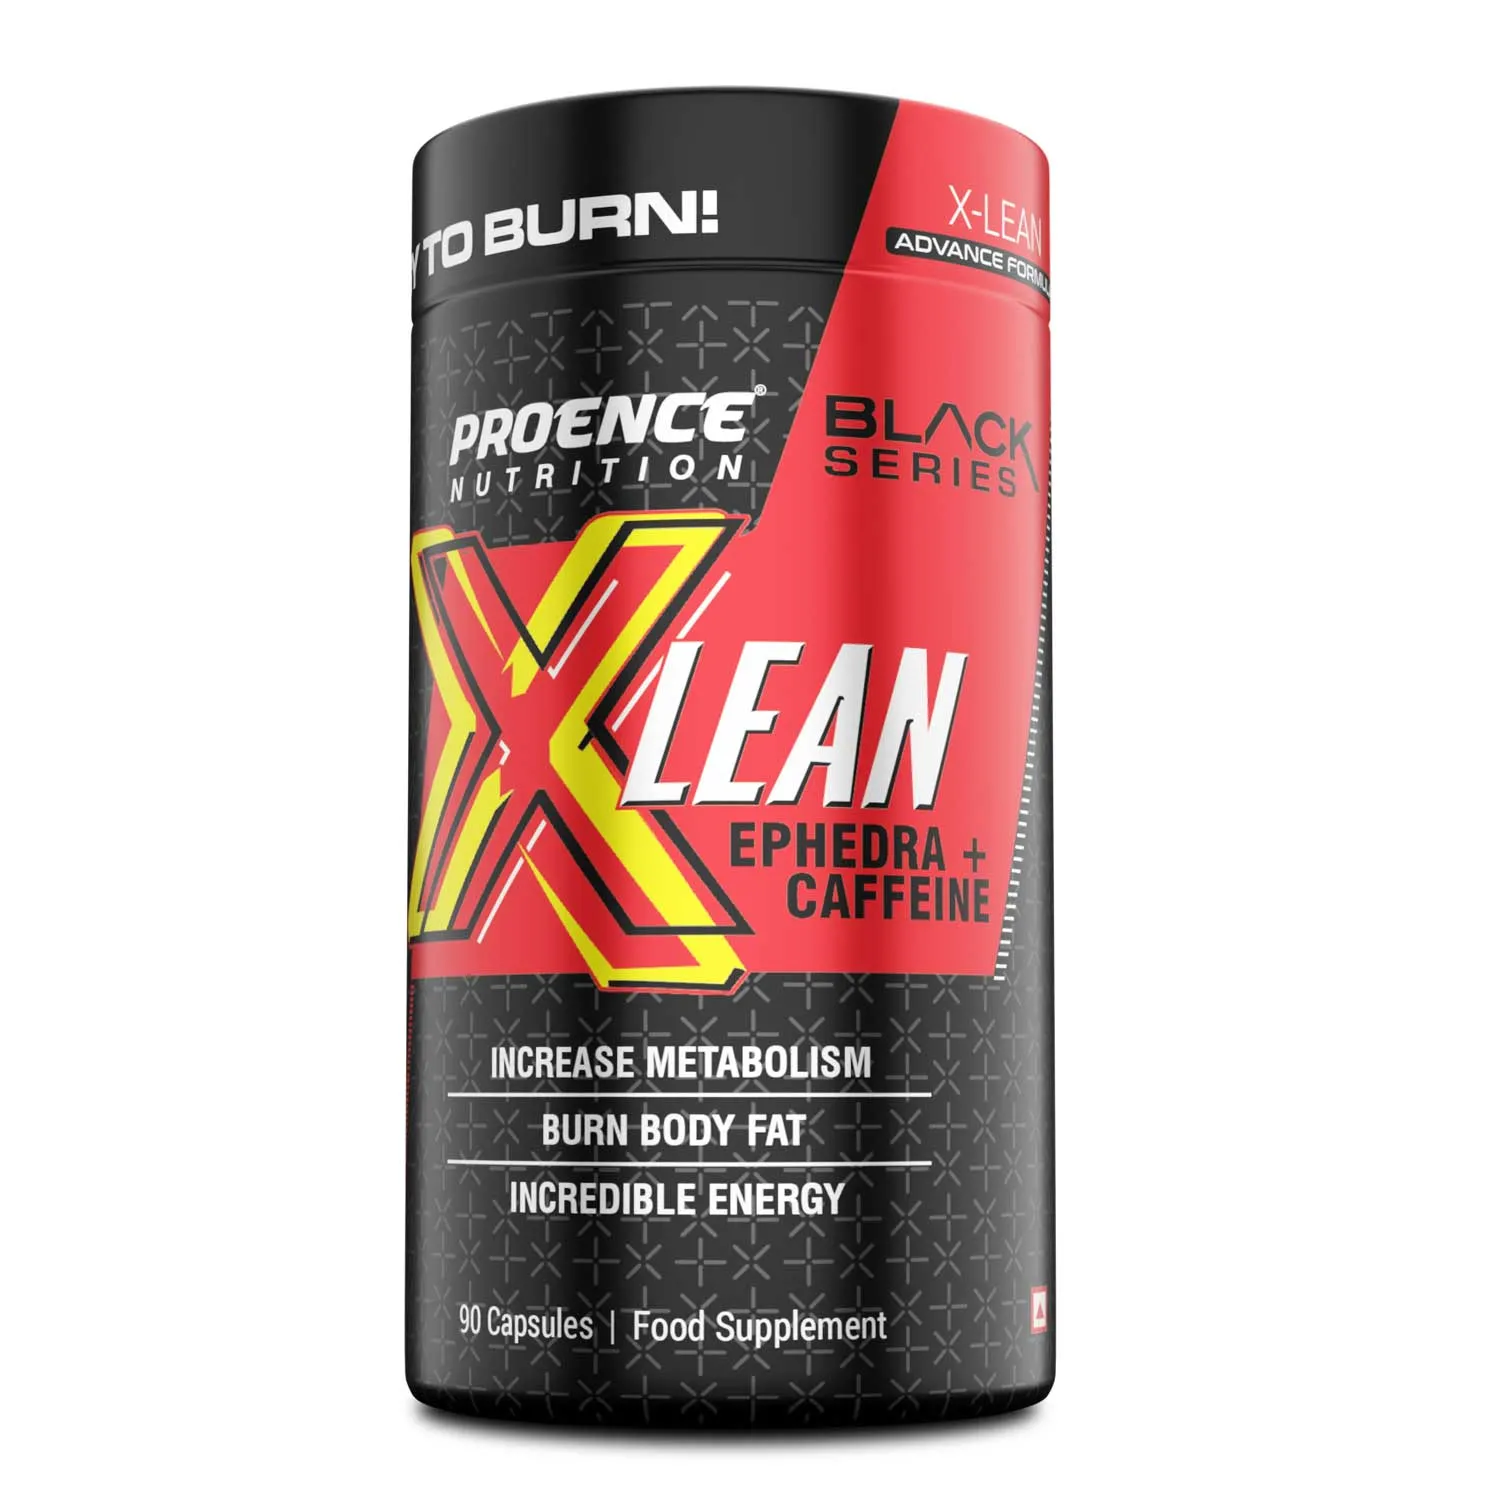 Proence X Lean 90 Capsules | Fat Burner & Natural Weight Loss Supplement For Women And Men